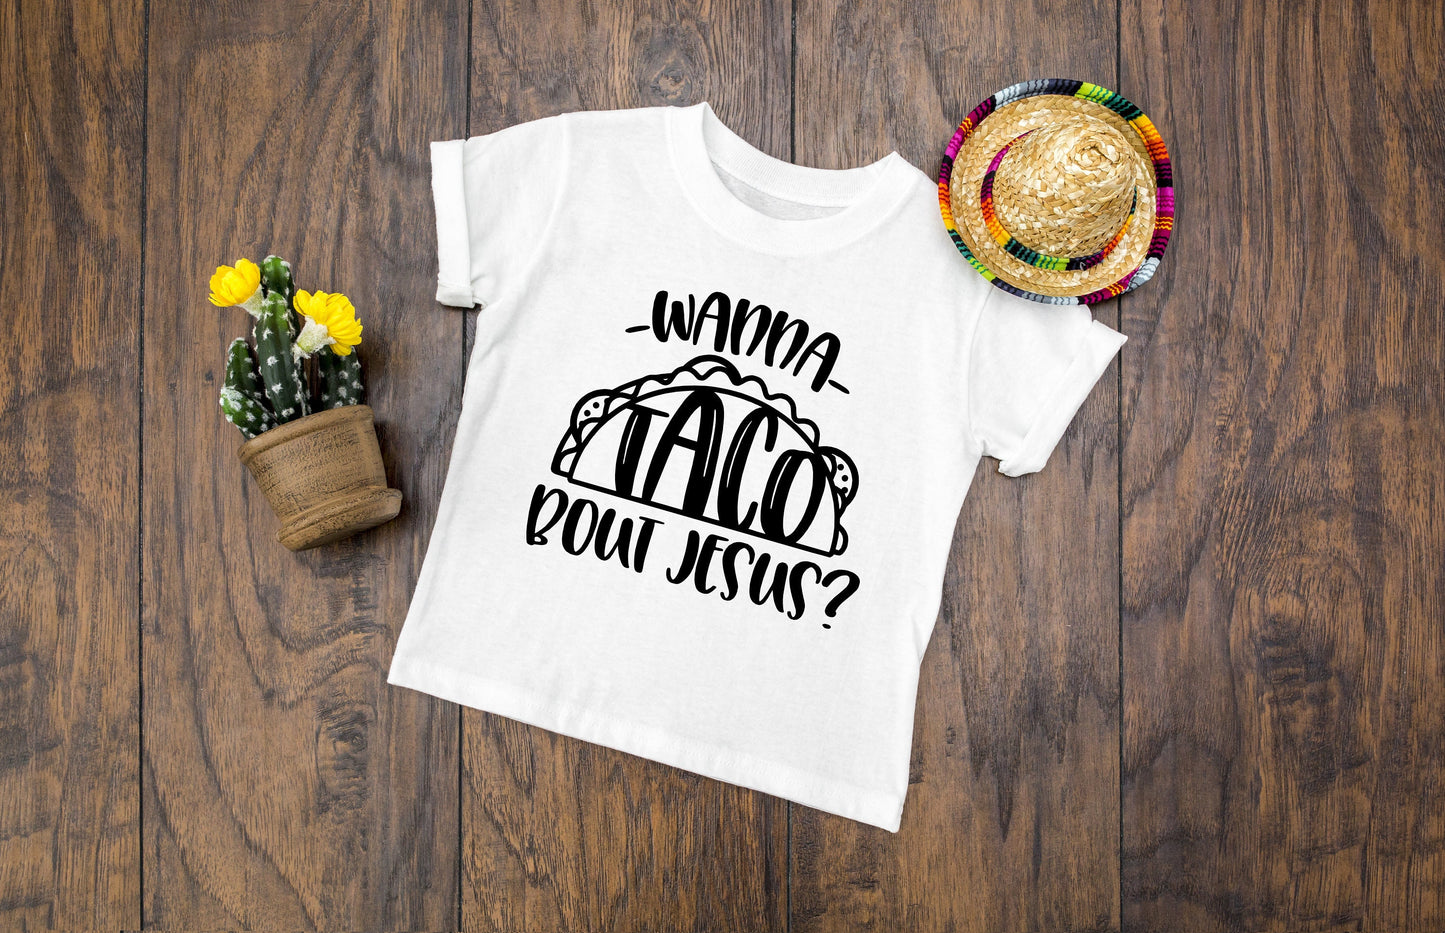 Wanna Taco Bout Jesus Infant or Youth Shirt or Bodysuit - christian kids shirt - religious shirts - christian t shirts - religious gifts